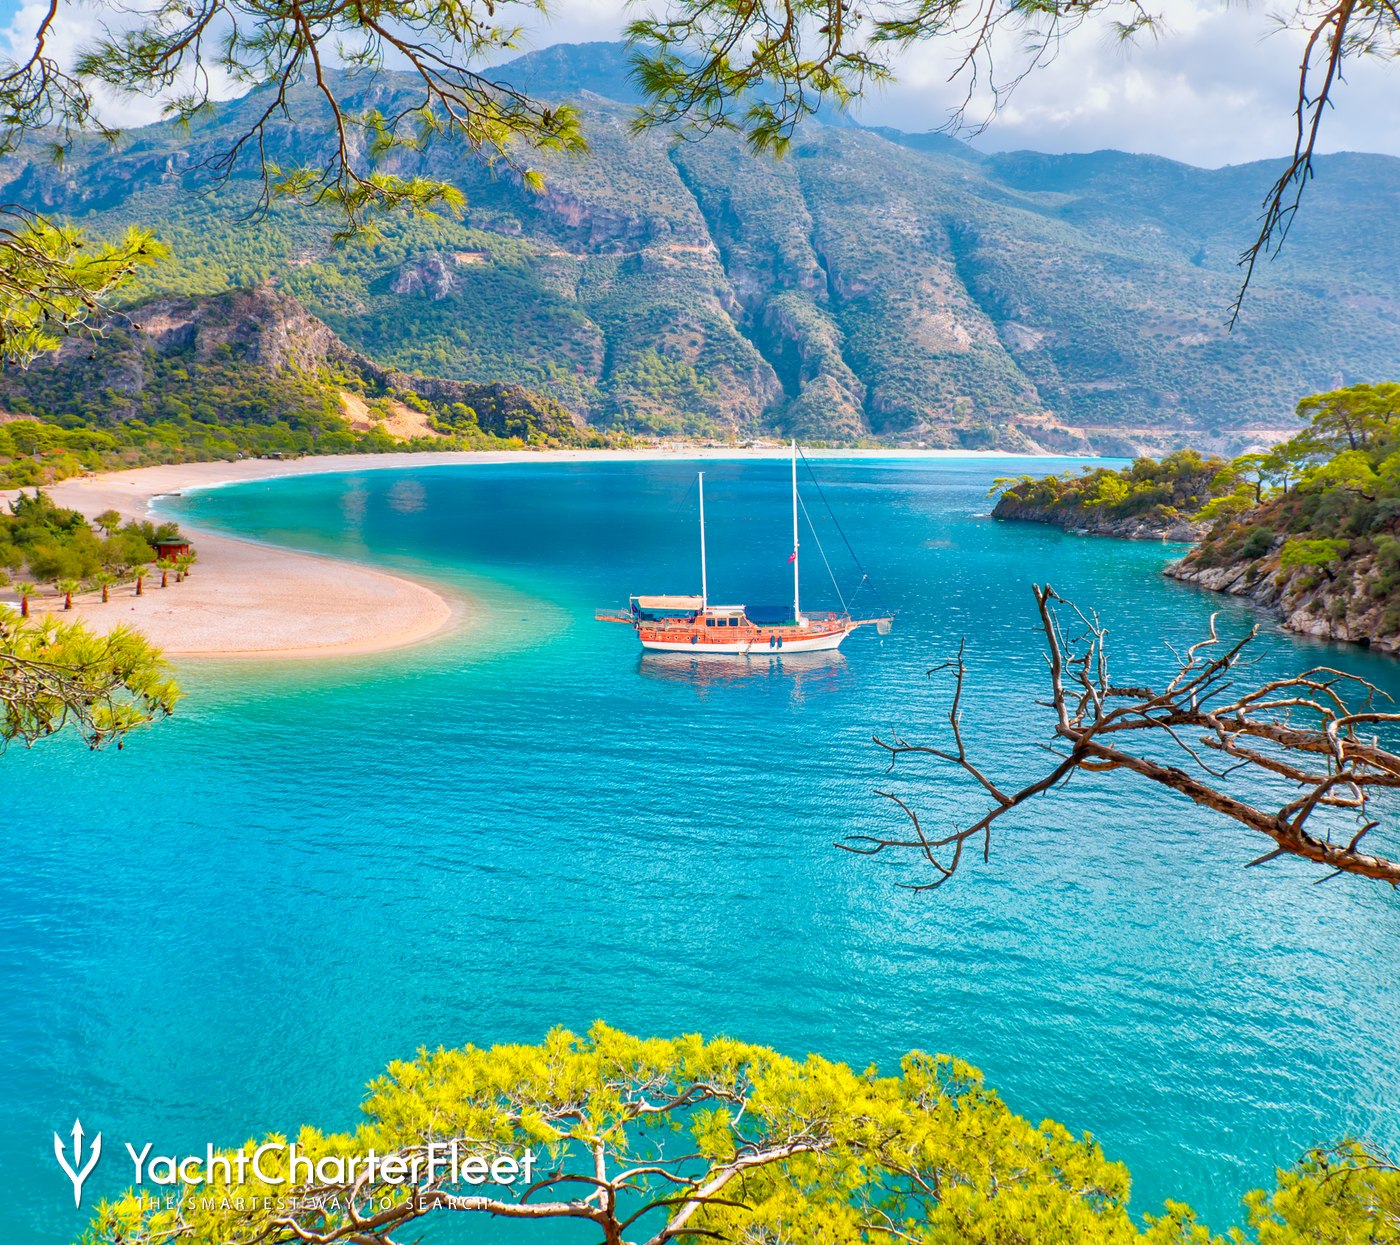 Five Of The Best Beaches In Turkey To Visit On A Luxury Yacht Charter ...